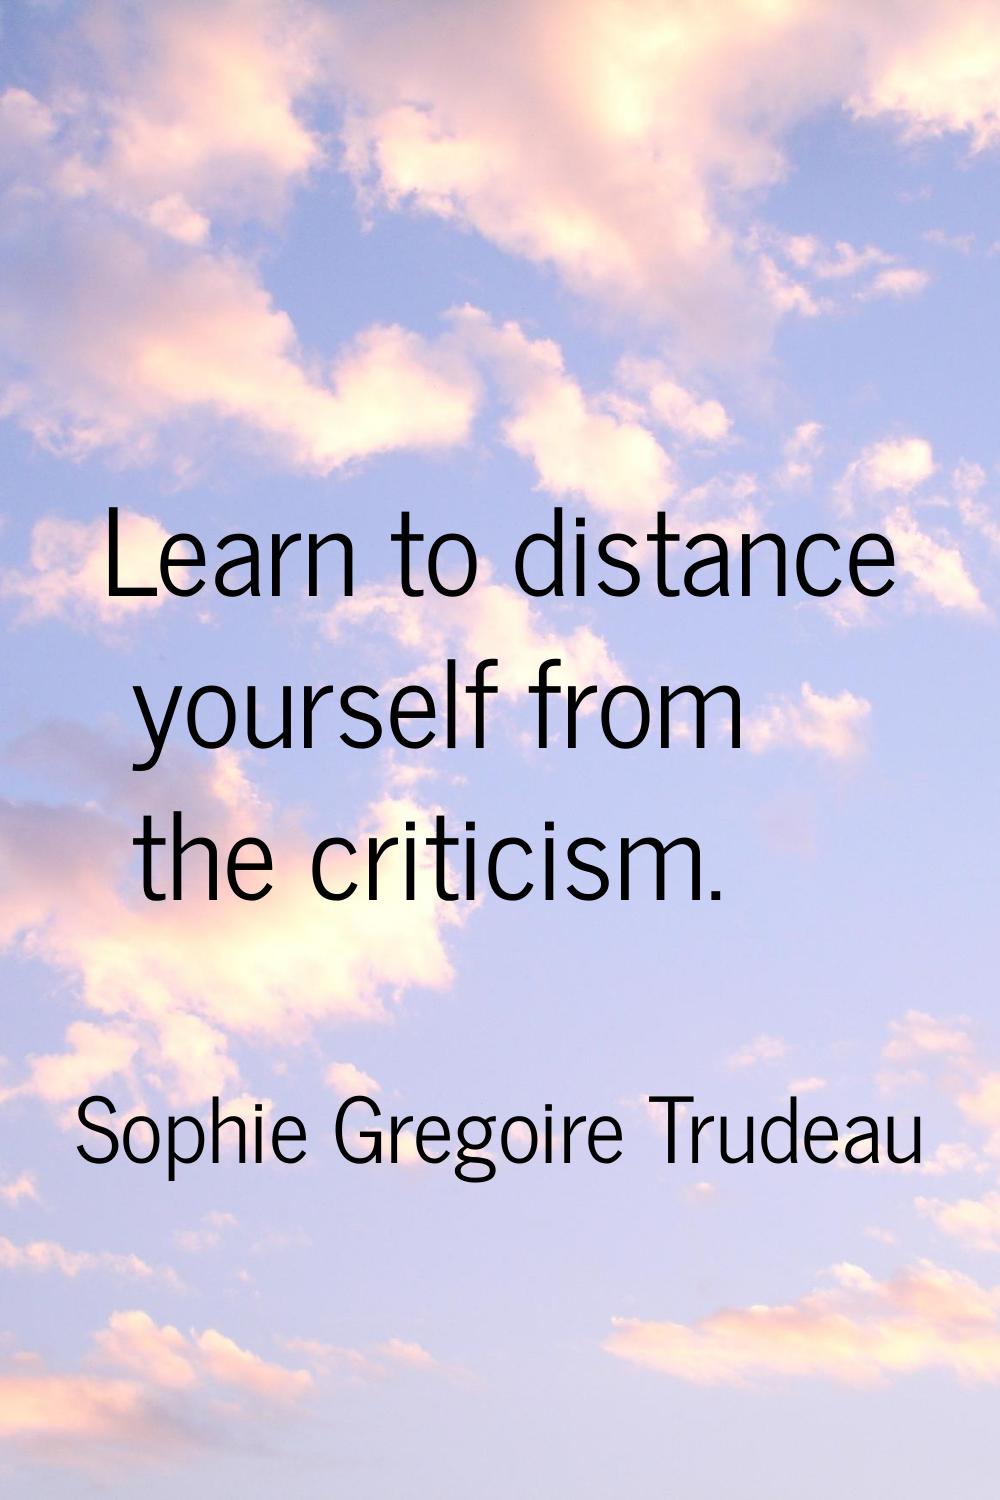 Learn to distance yourself from the criticism.